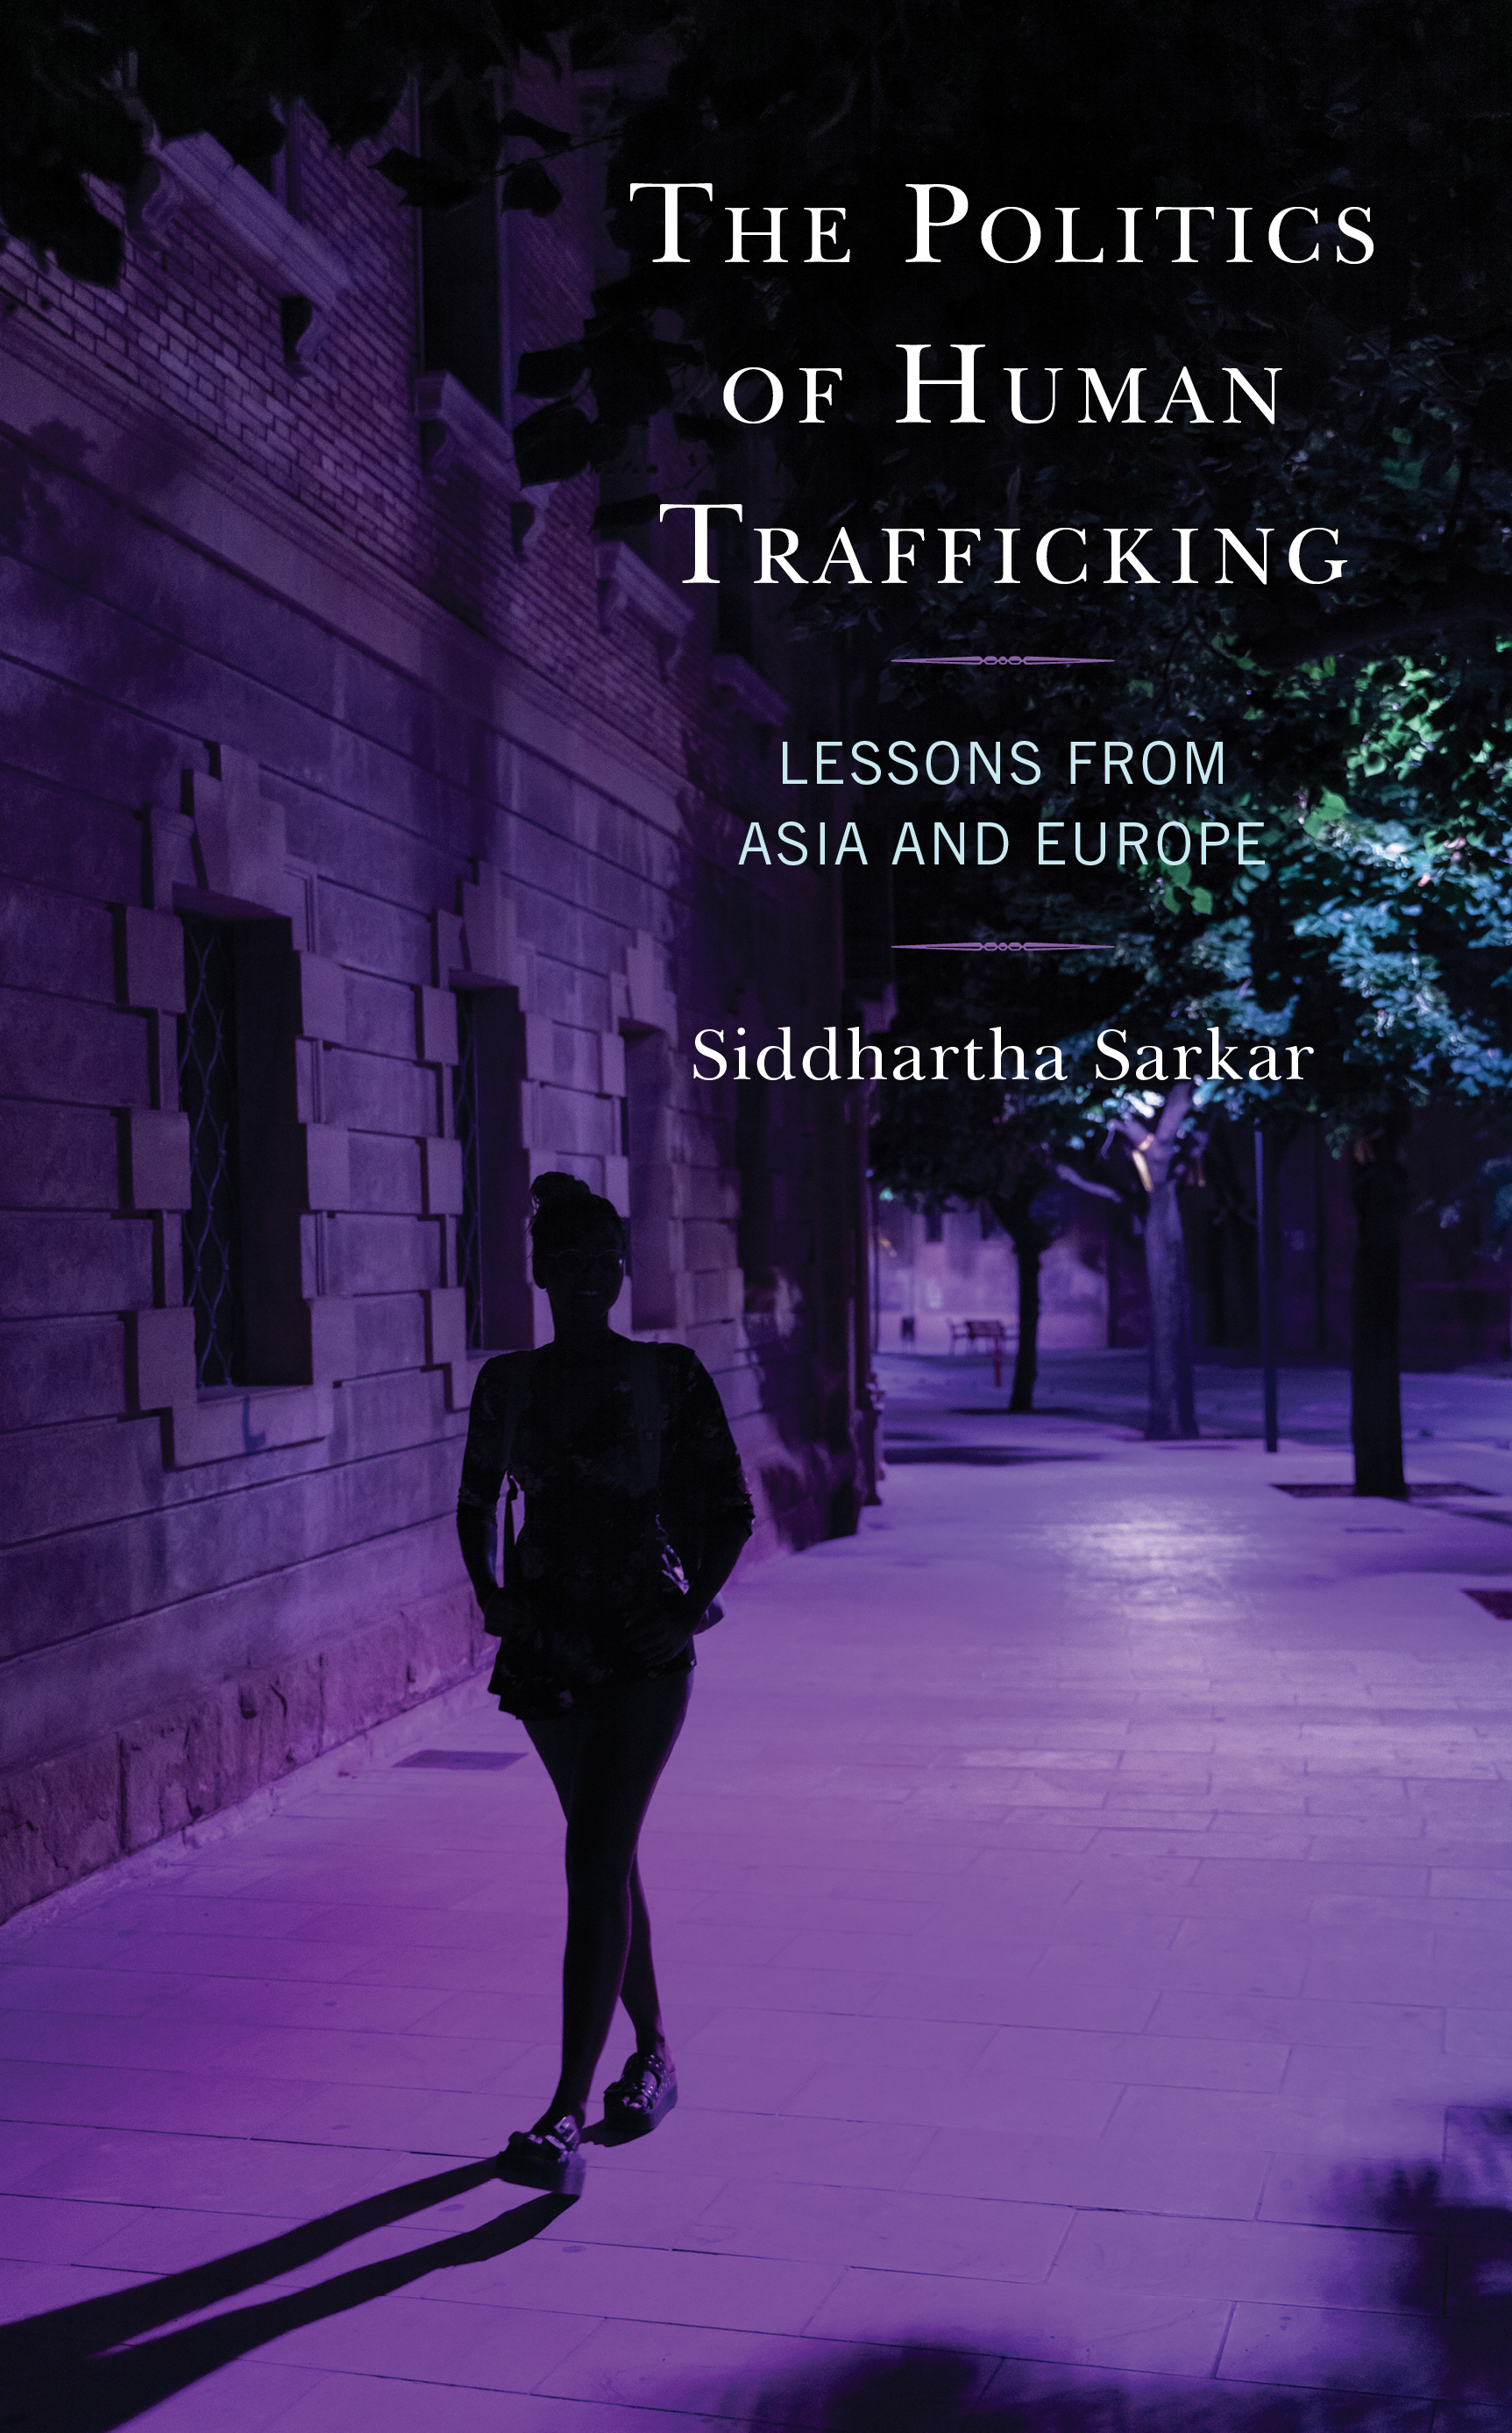 The Politics of Human Trafficking: Lessons from Asia and Europe